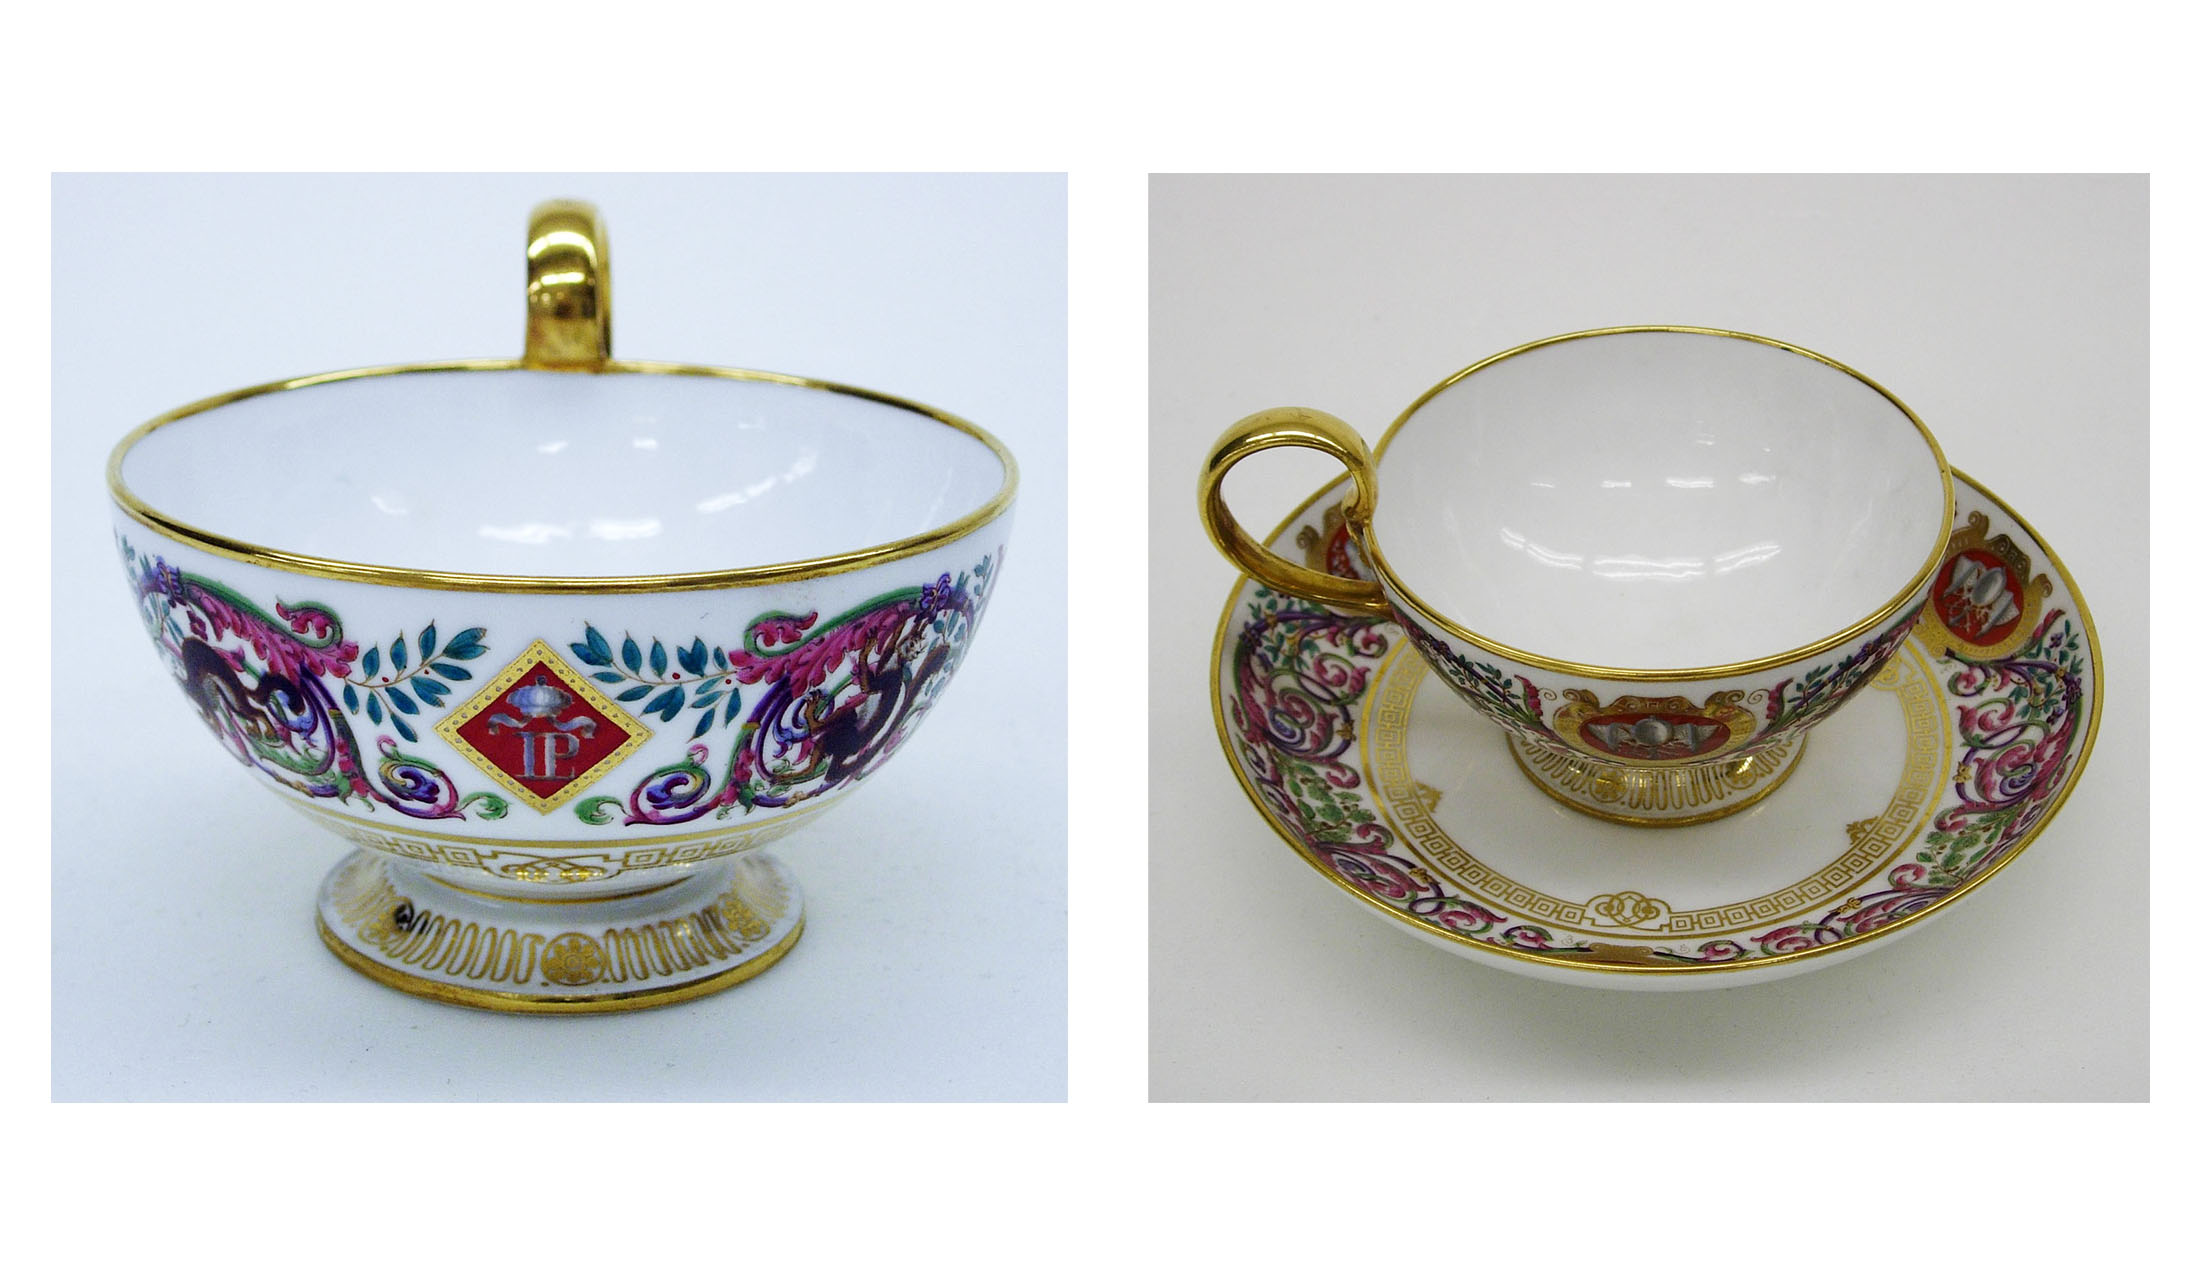 on the left, a white porcelain teacup with gold rims and floral designs; on the right, the same teacup on top of a saucer with the same pattern